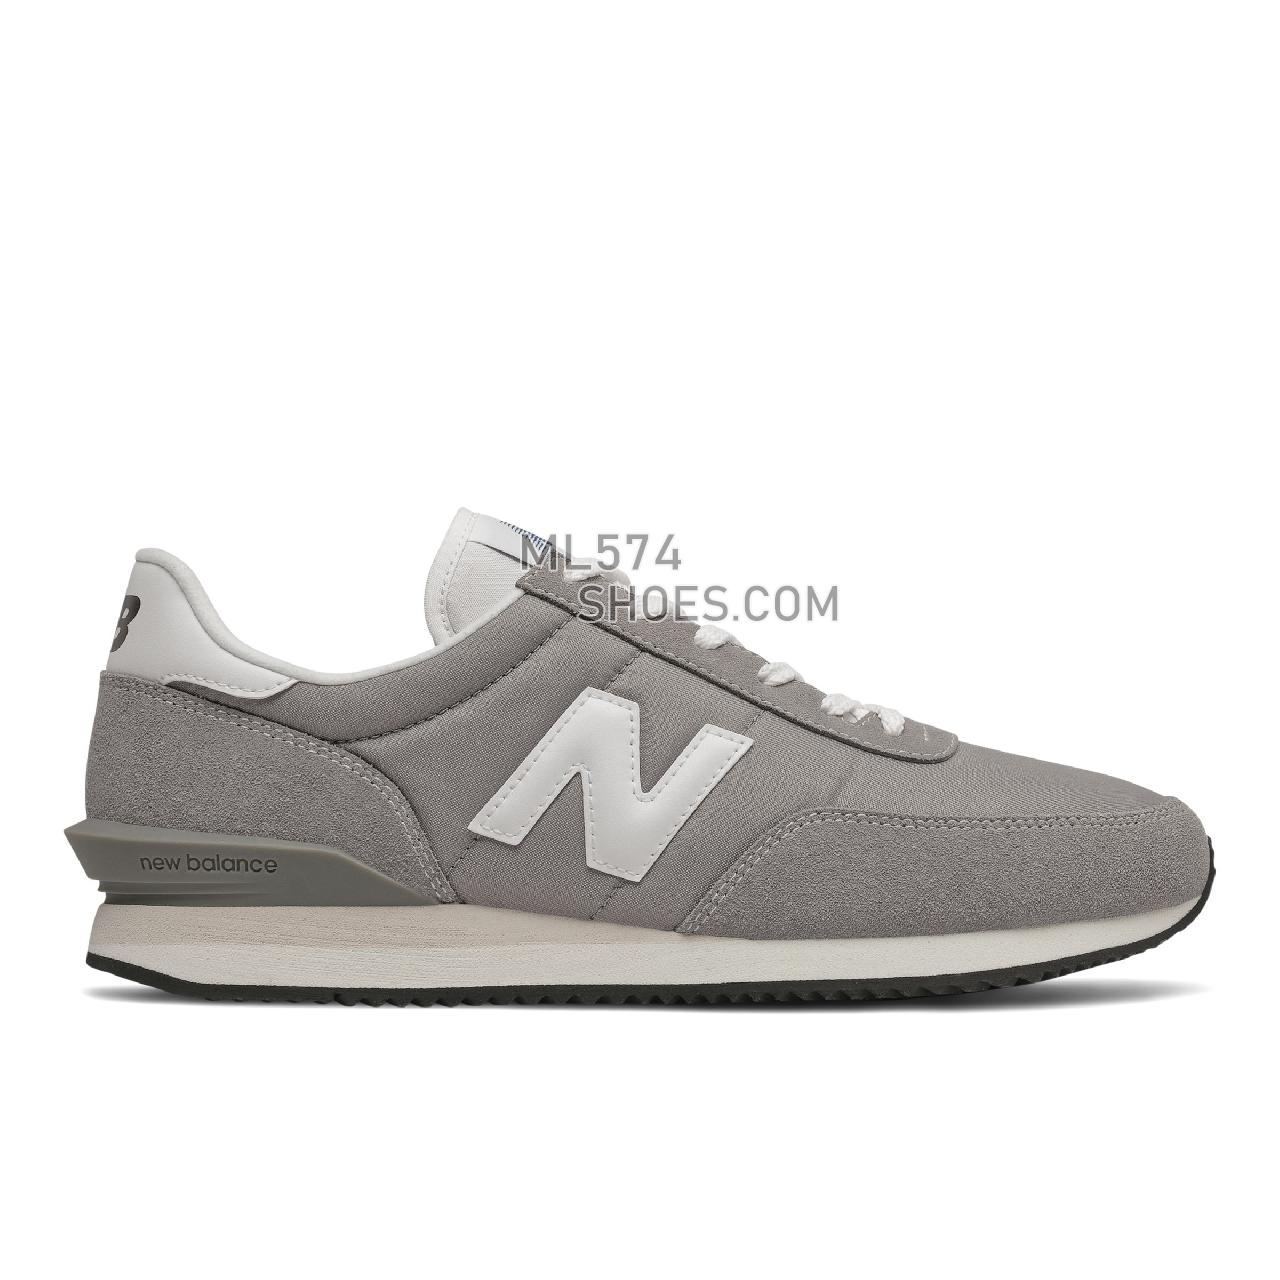 New Balance 720 - Unisex Men's Women's Classic Sneakers - Marblehead with Nb White - UL720MW1